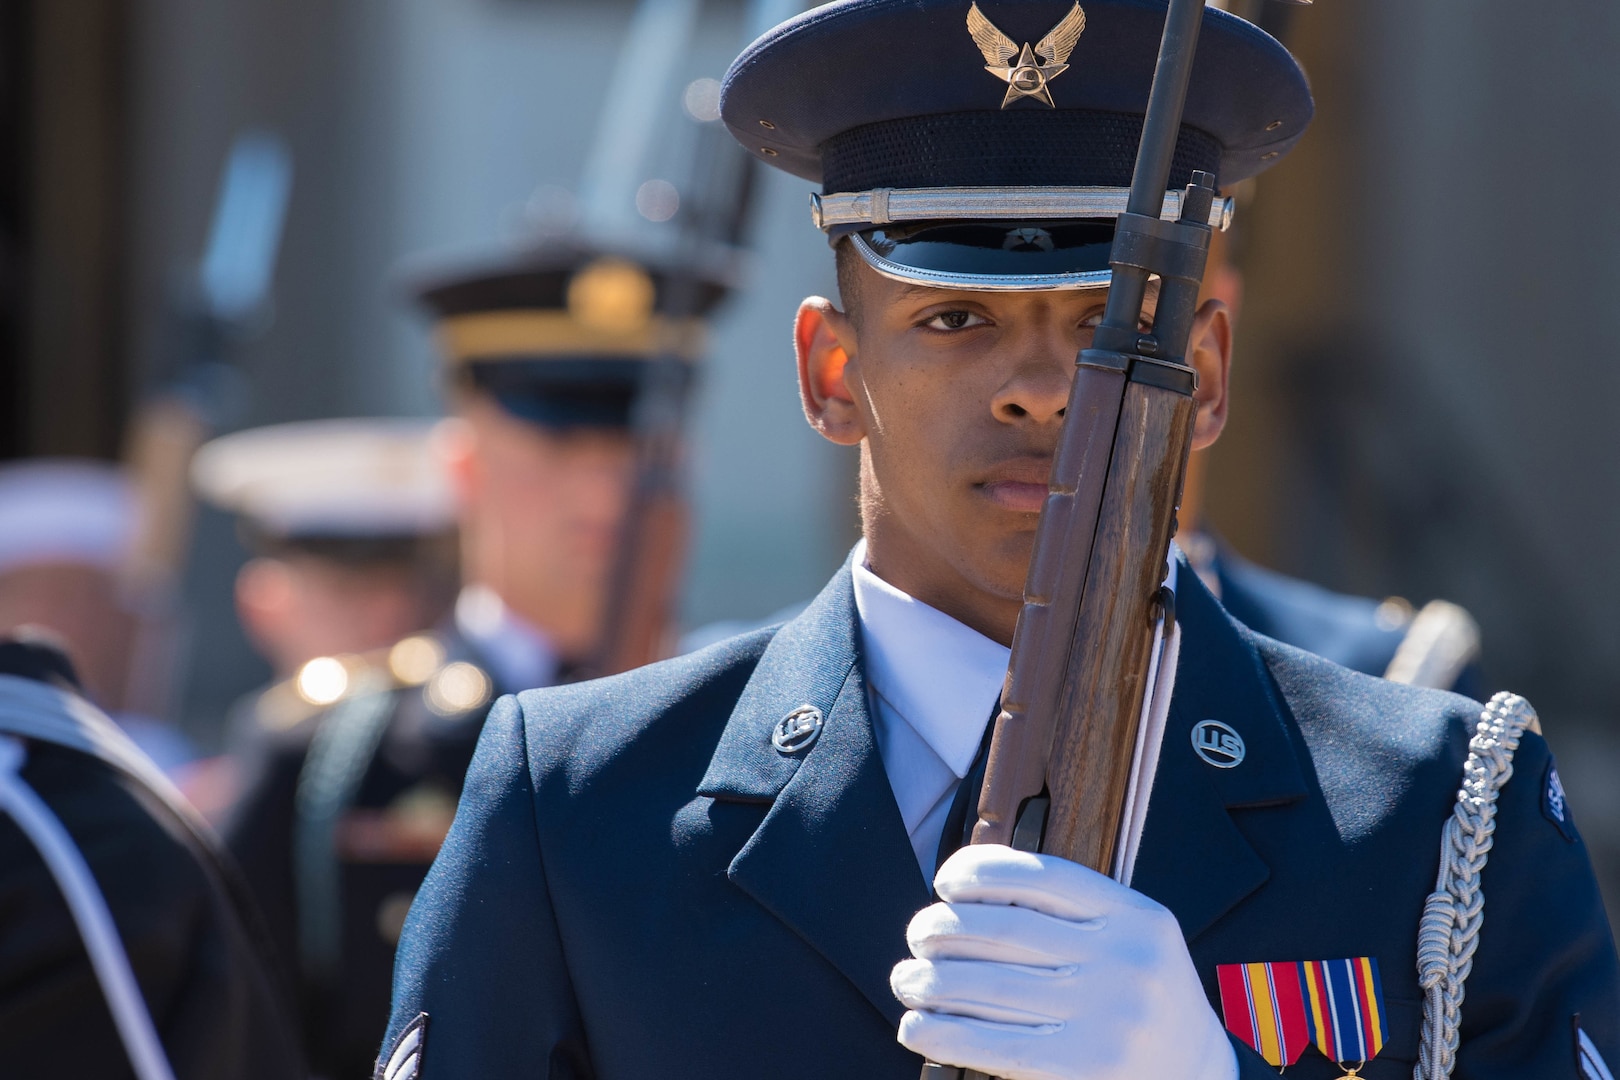 An airman holds a rifle while standing at attention during a ceremony at the Pentagon.